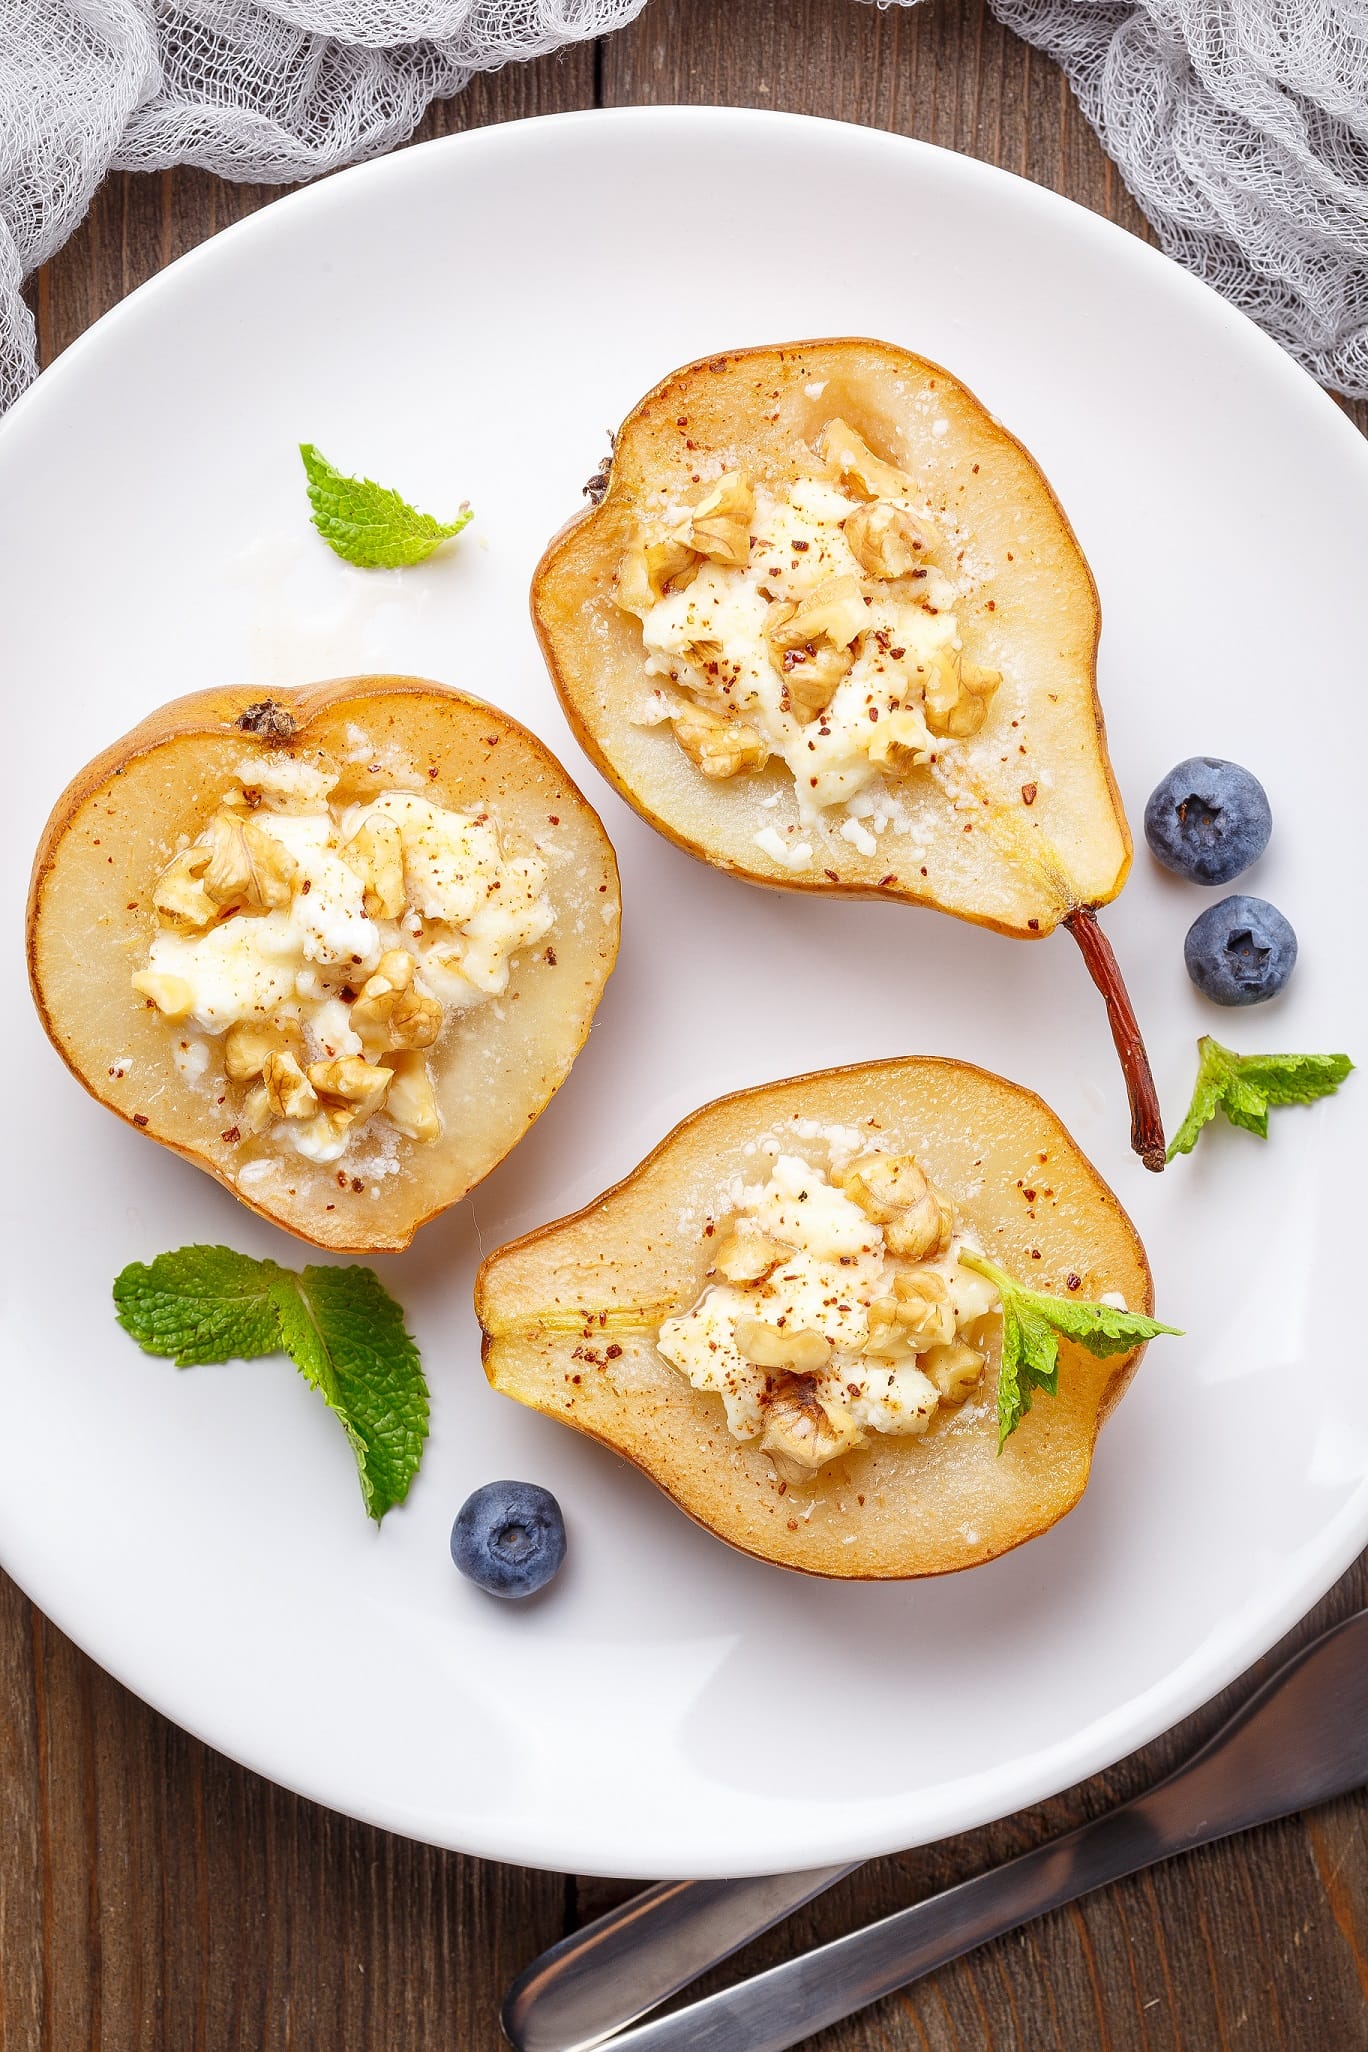 Roasted pears with blue cheese and walnuts